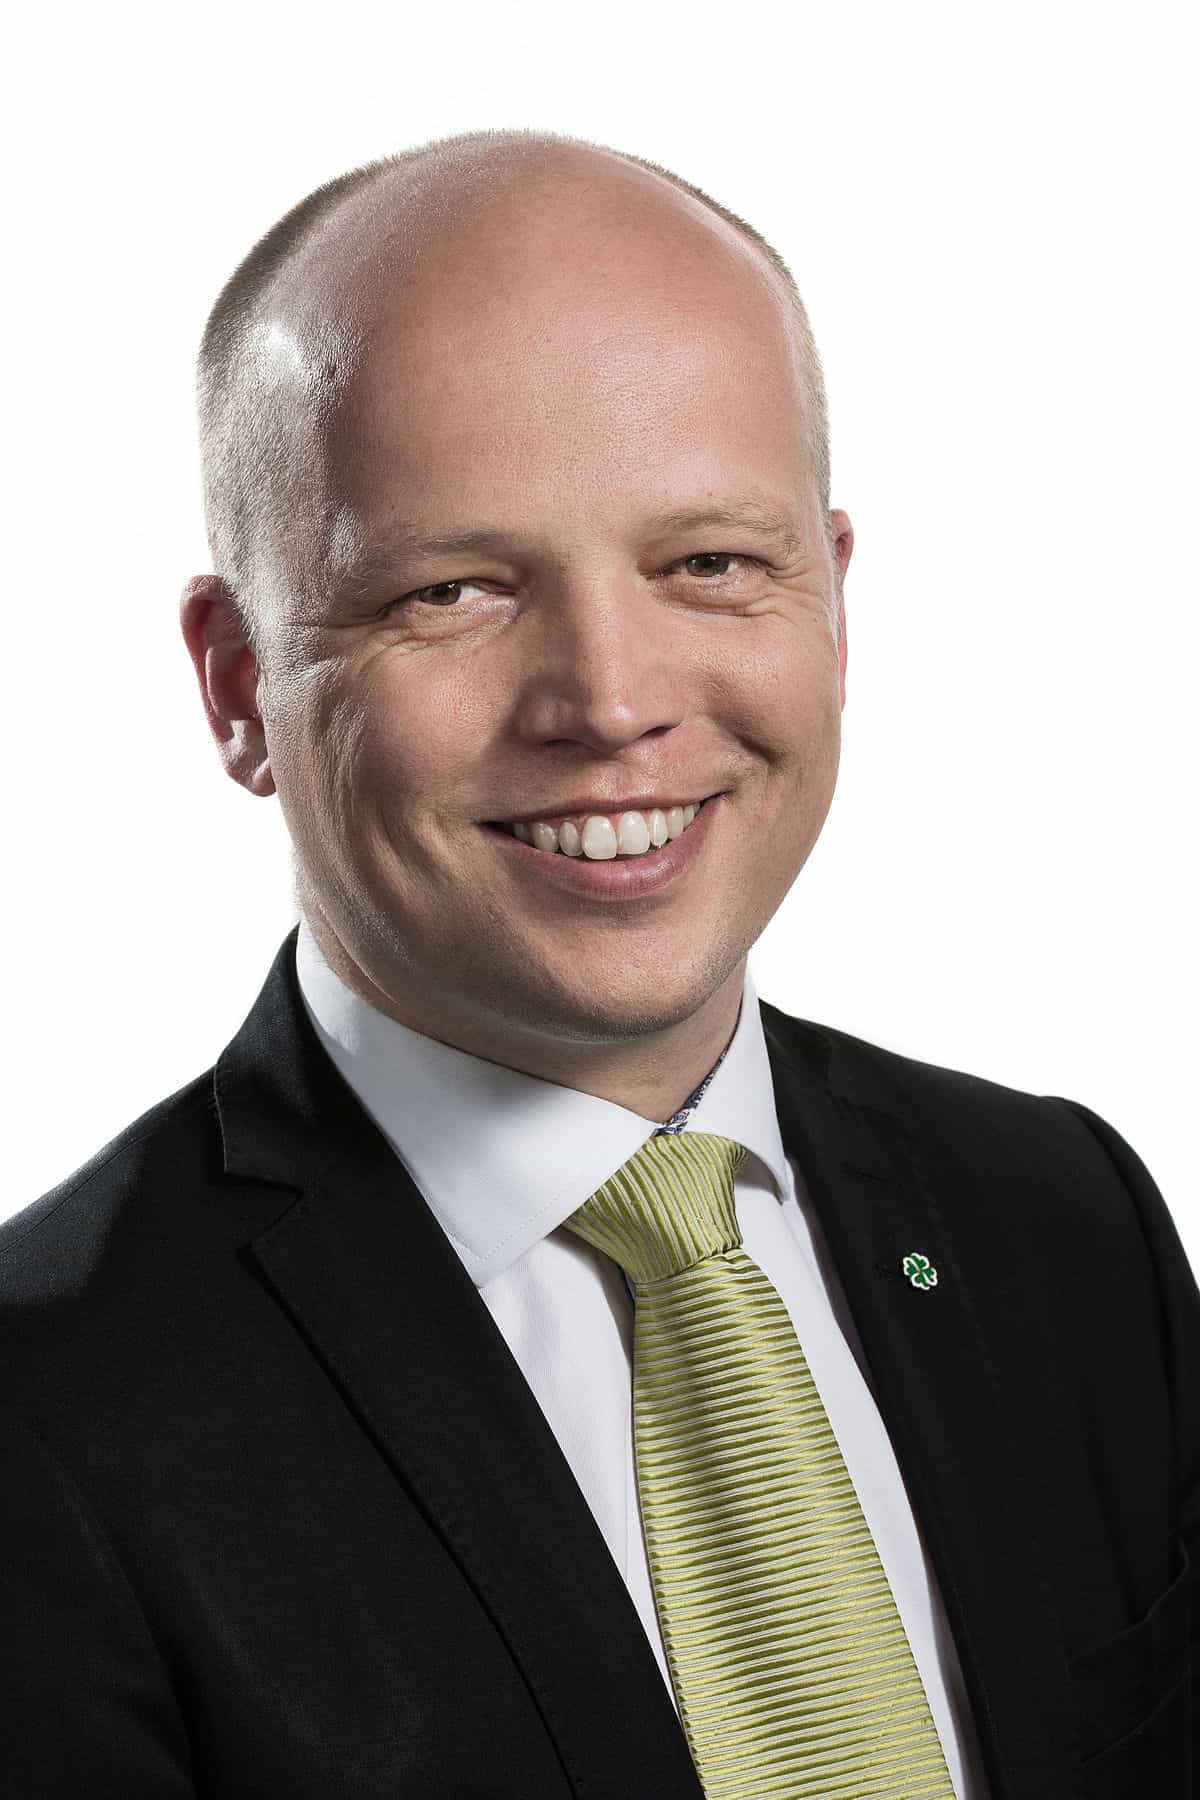 Norway’s Finance Minister Thinks Local Bitcoin Miners Should not Pay Less for Electricity